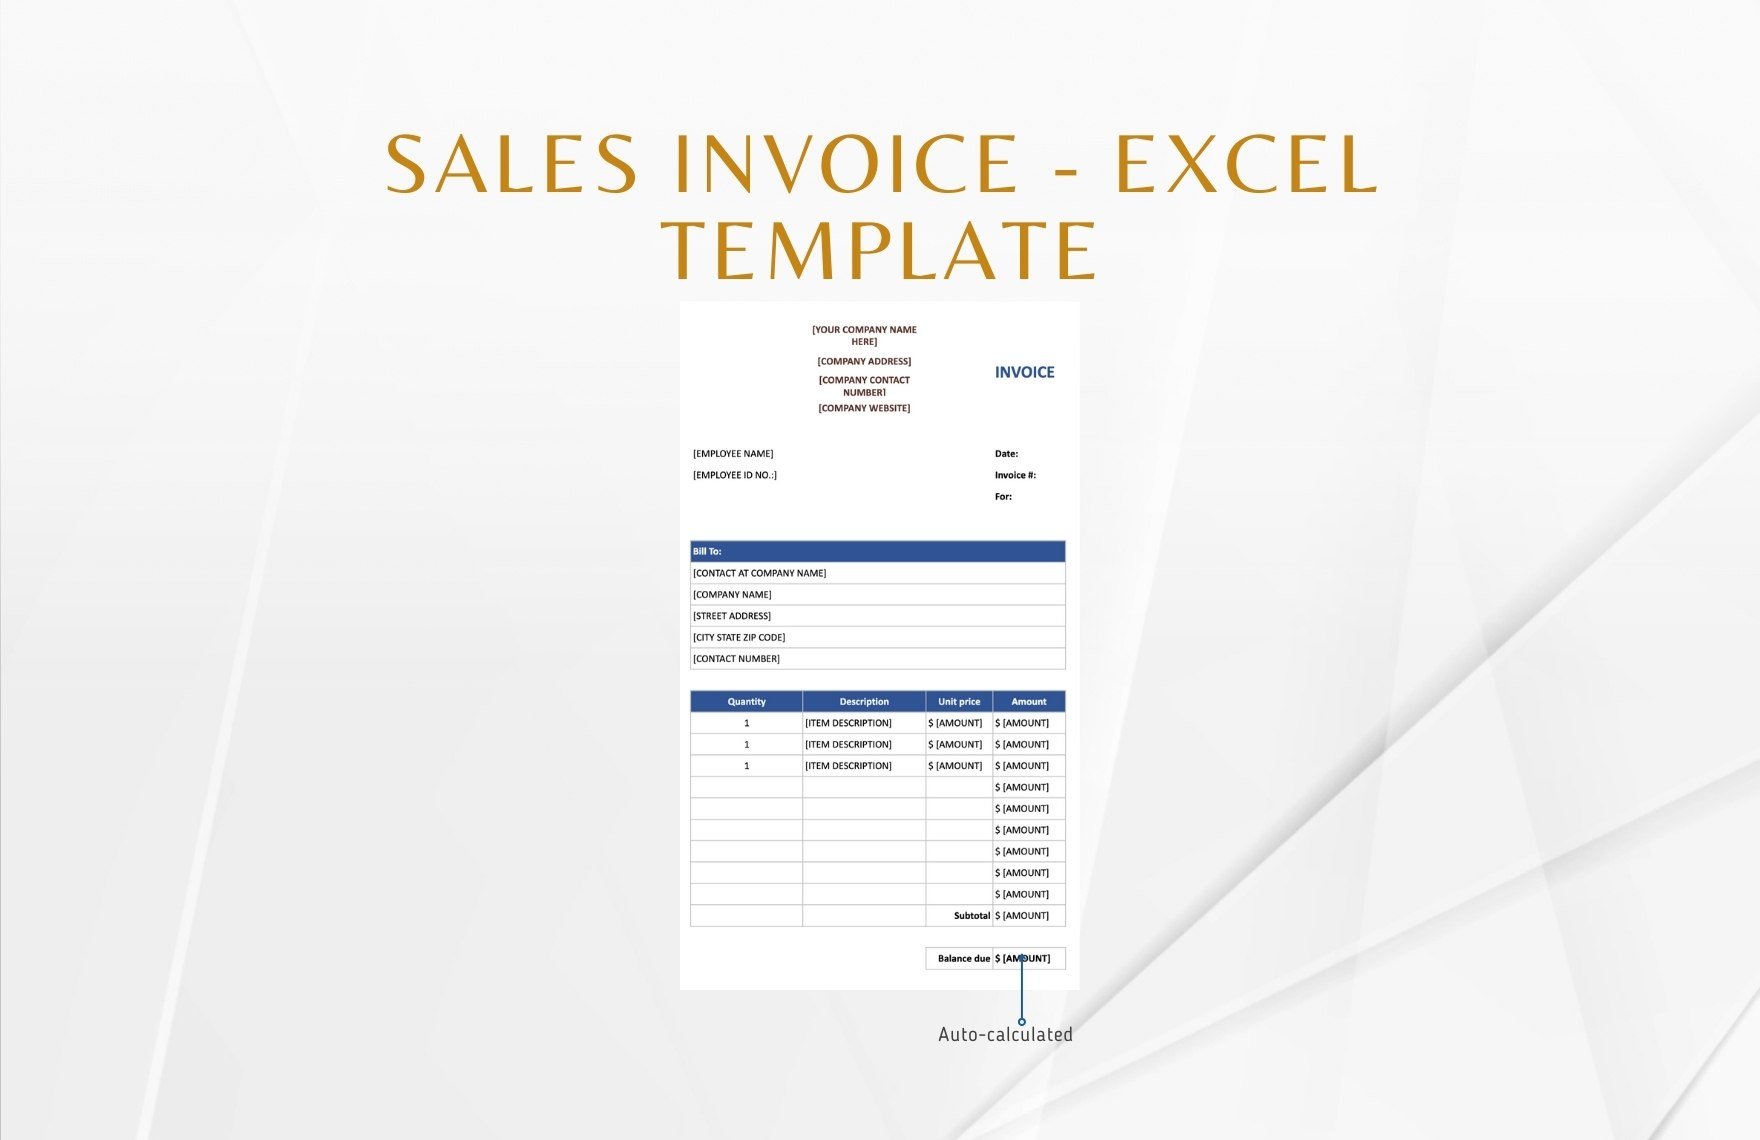 Sales Invoice - Excel Template